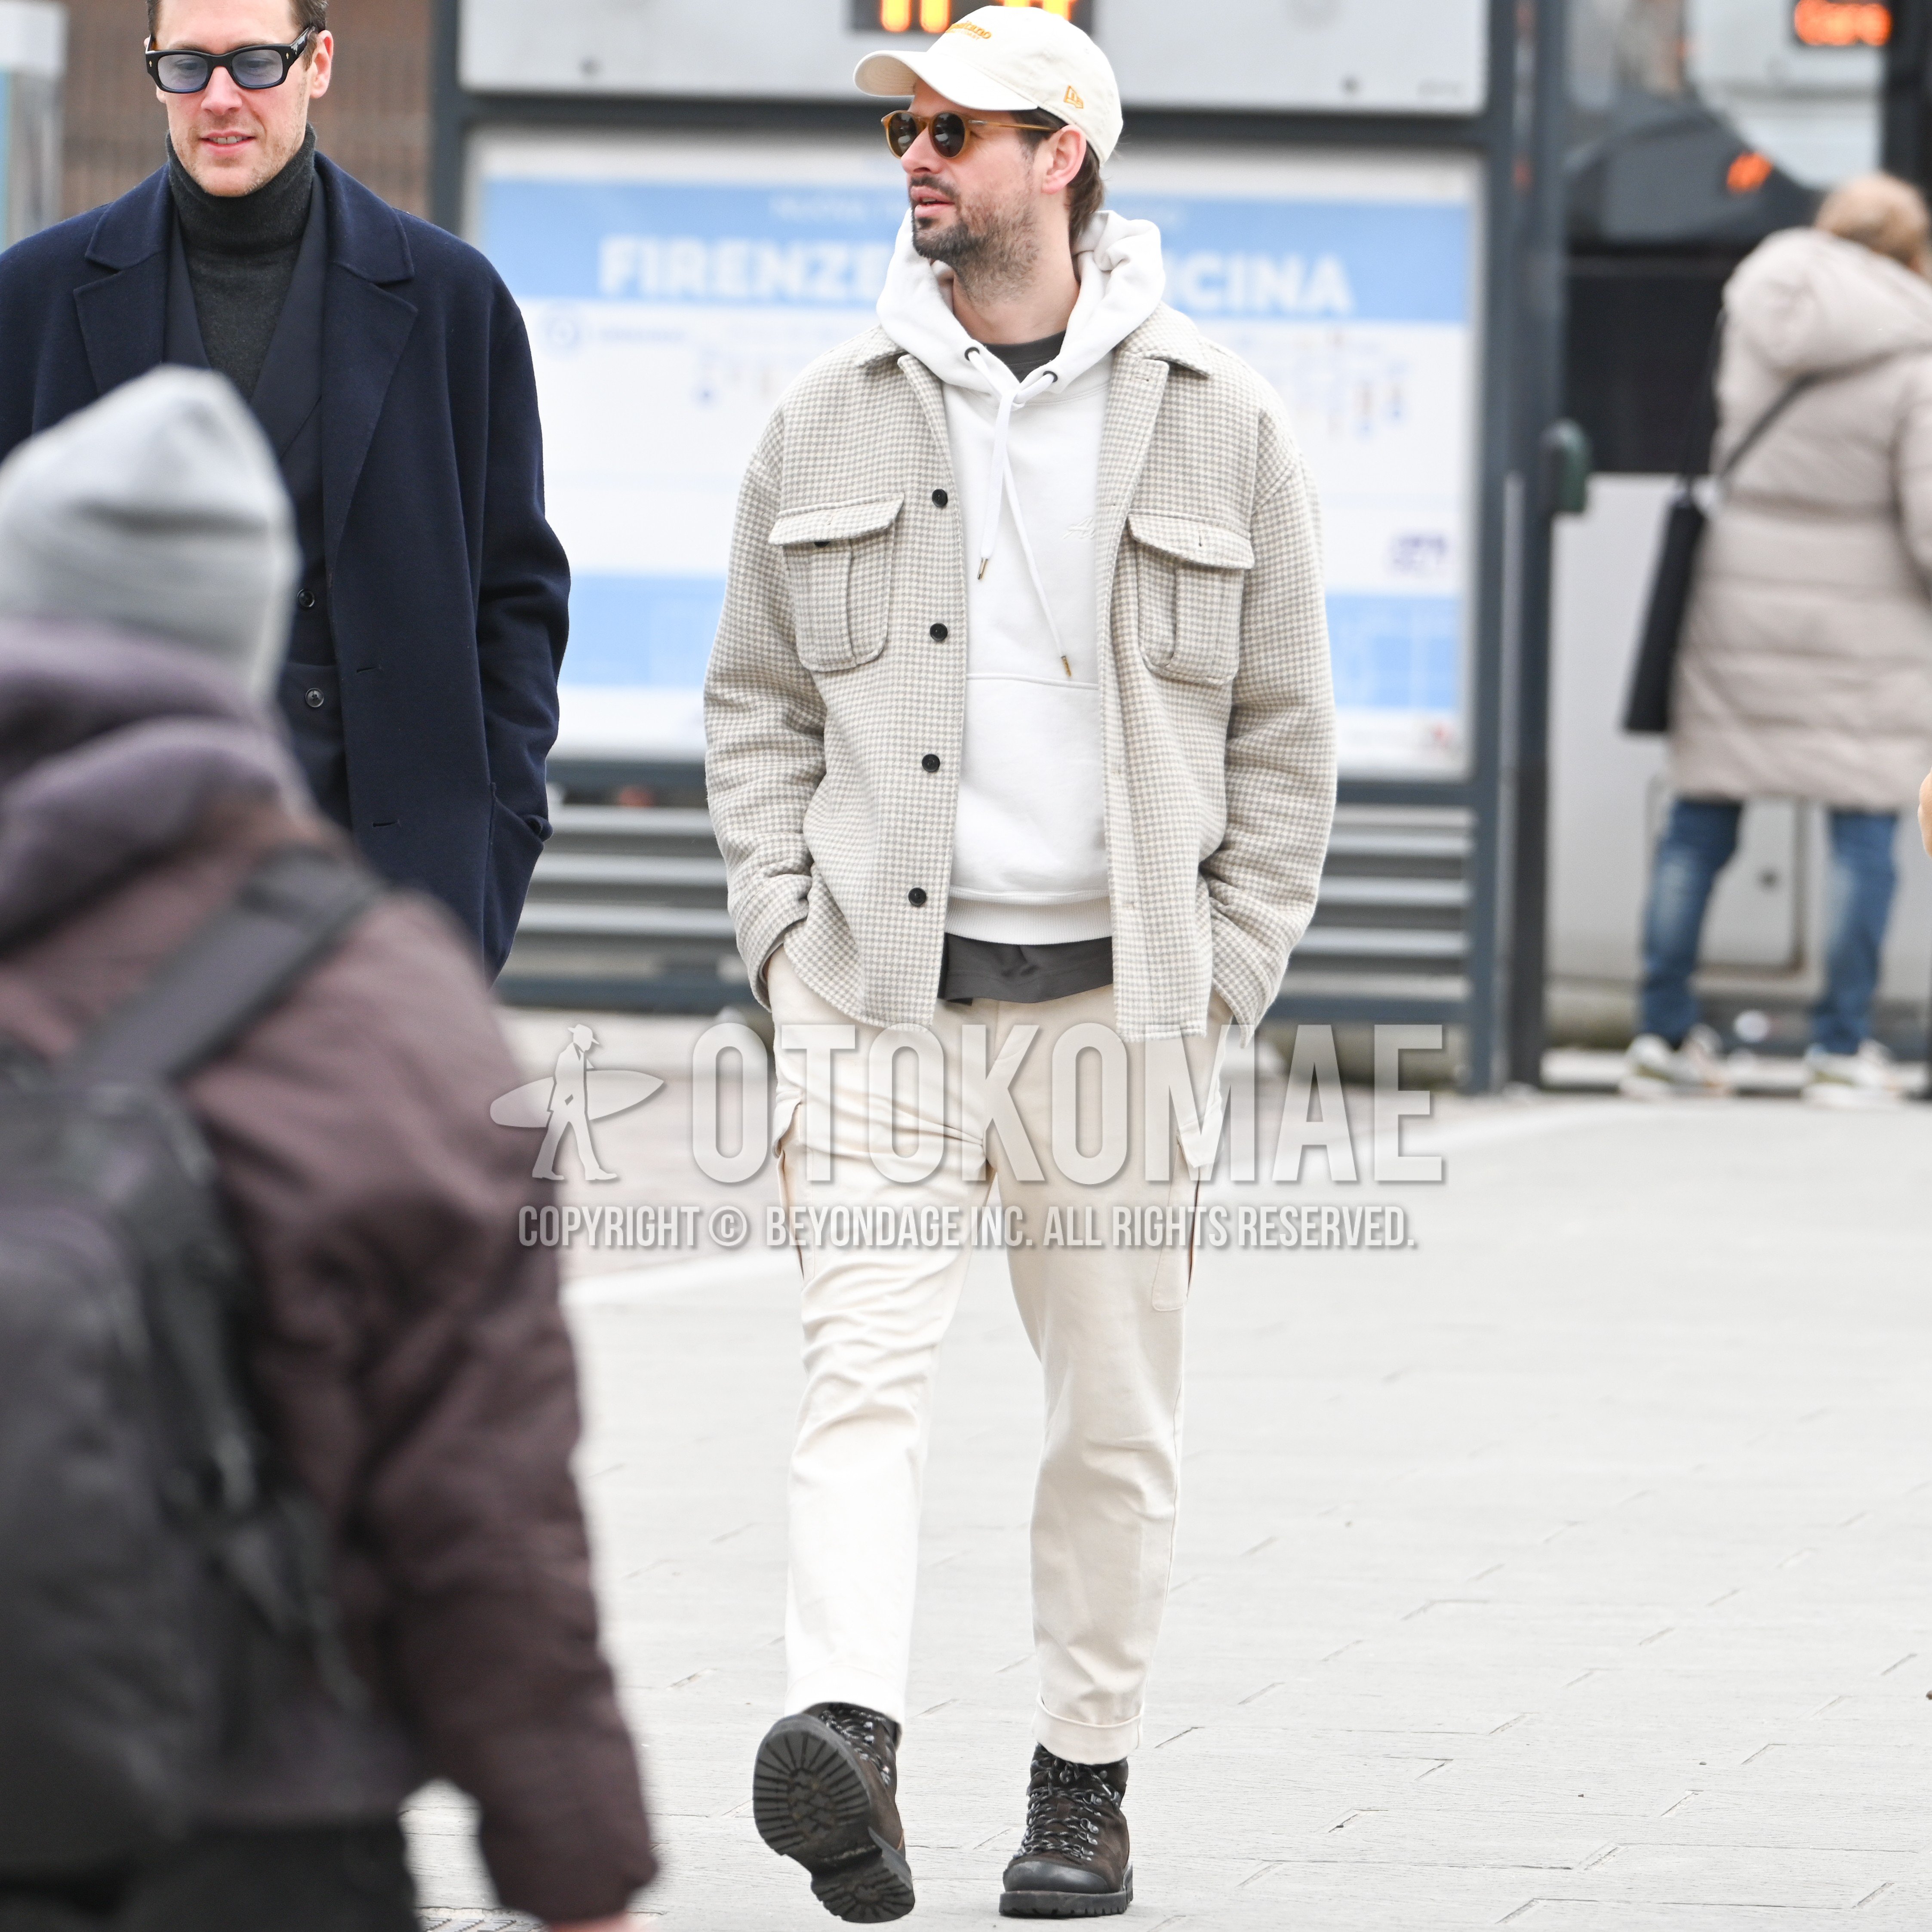 Men's spring autumn outfit with white plain baseball cap, brown plain sunglasses, gray check shirt jacket, white plain hoodie, white plain cargo pants, brown work boots.